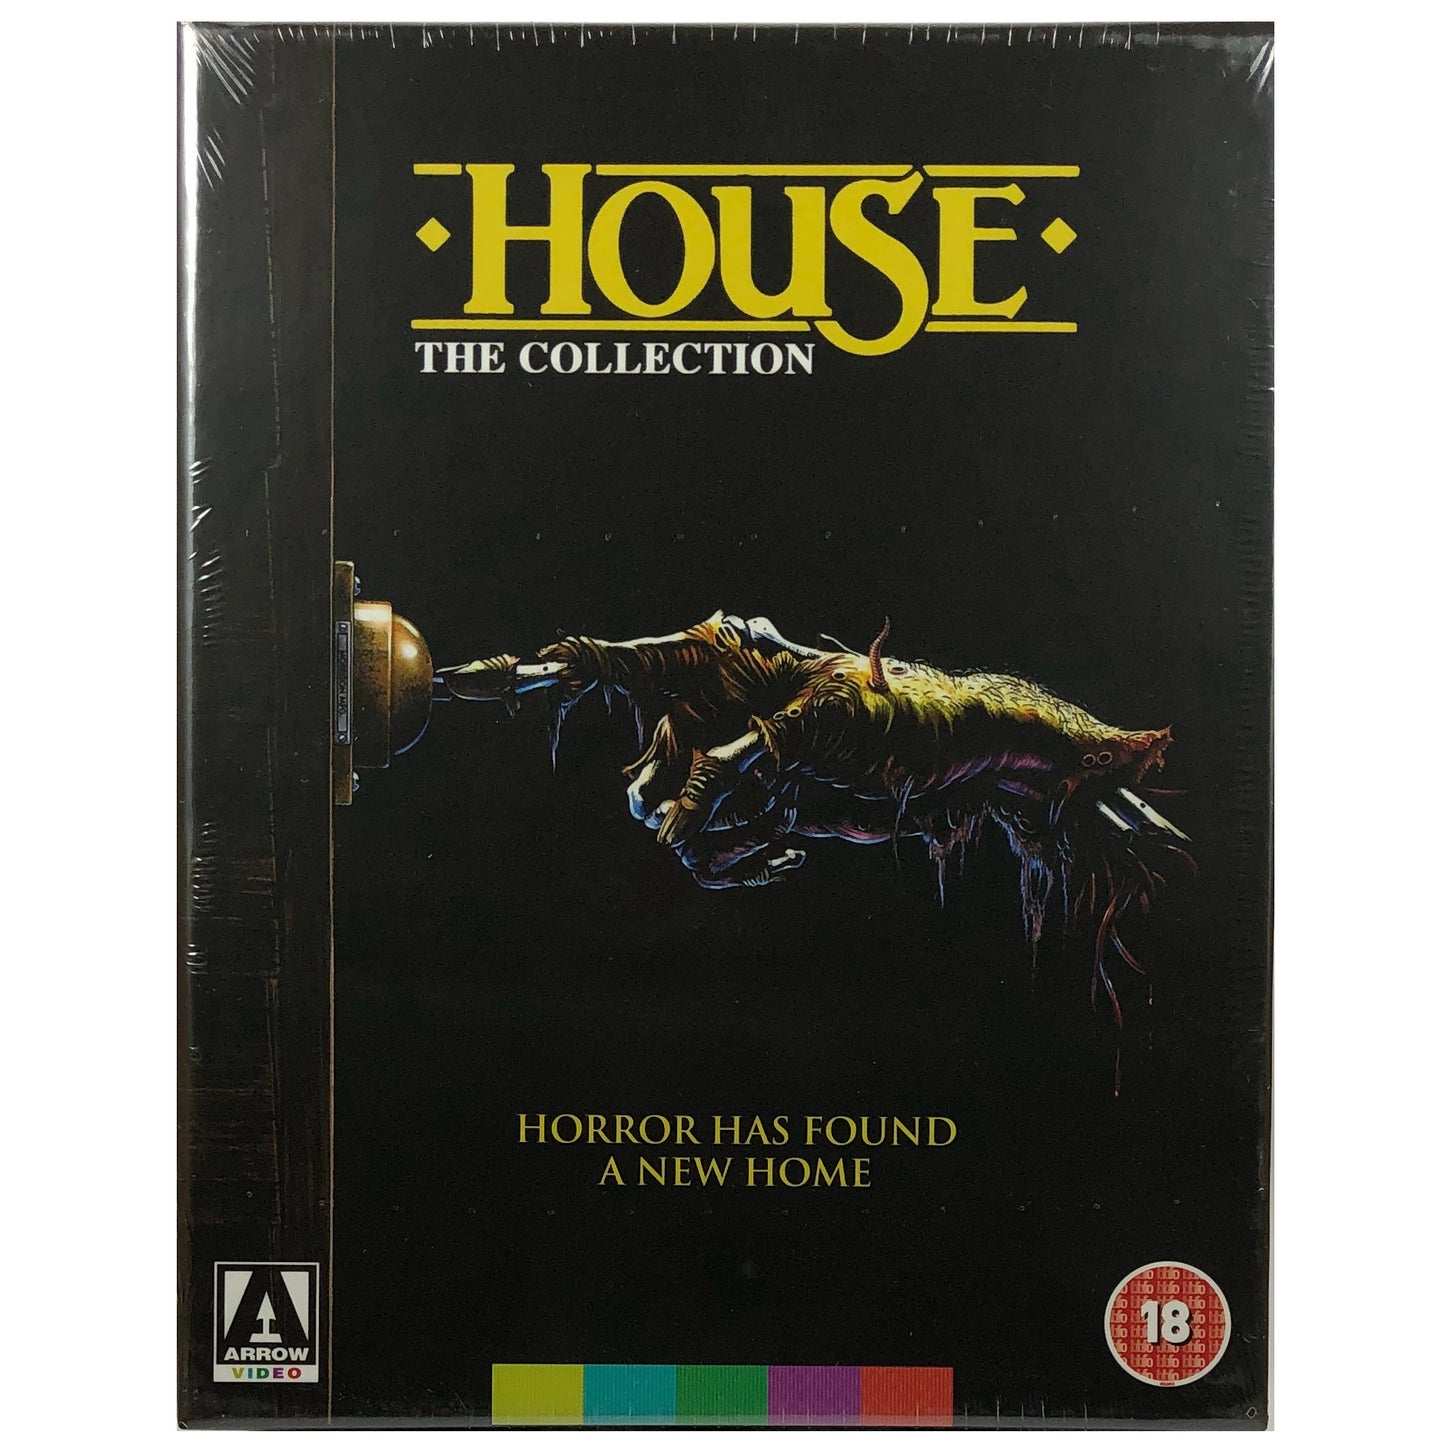 House: The Collection Blu-Ray Box Set